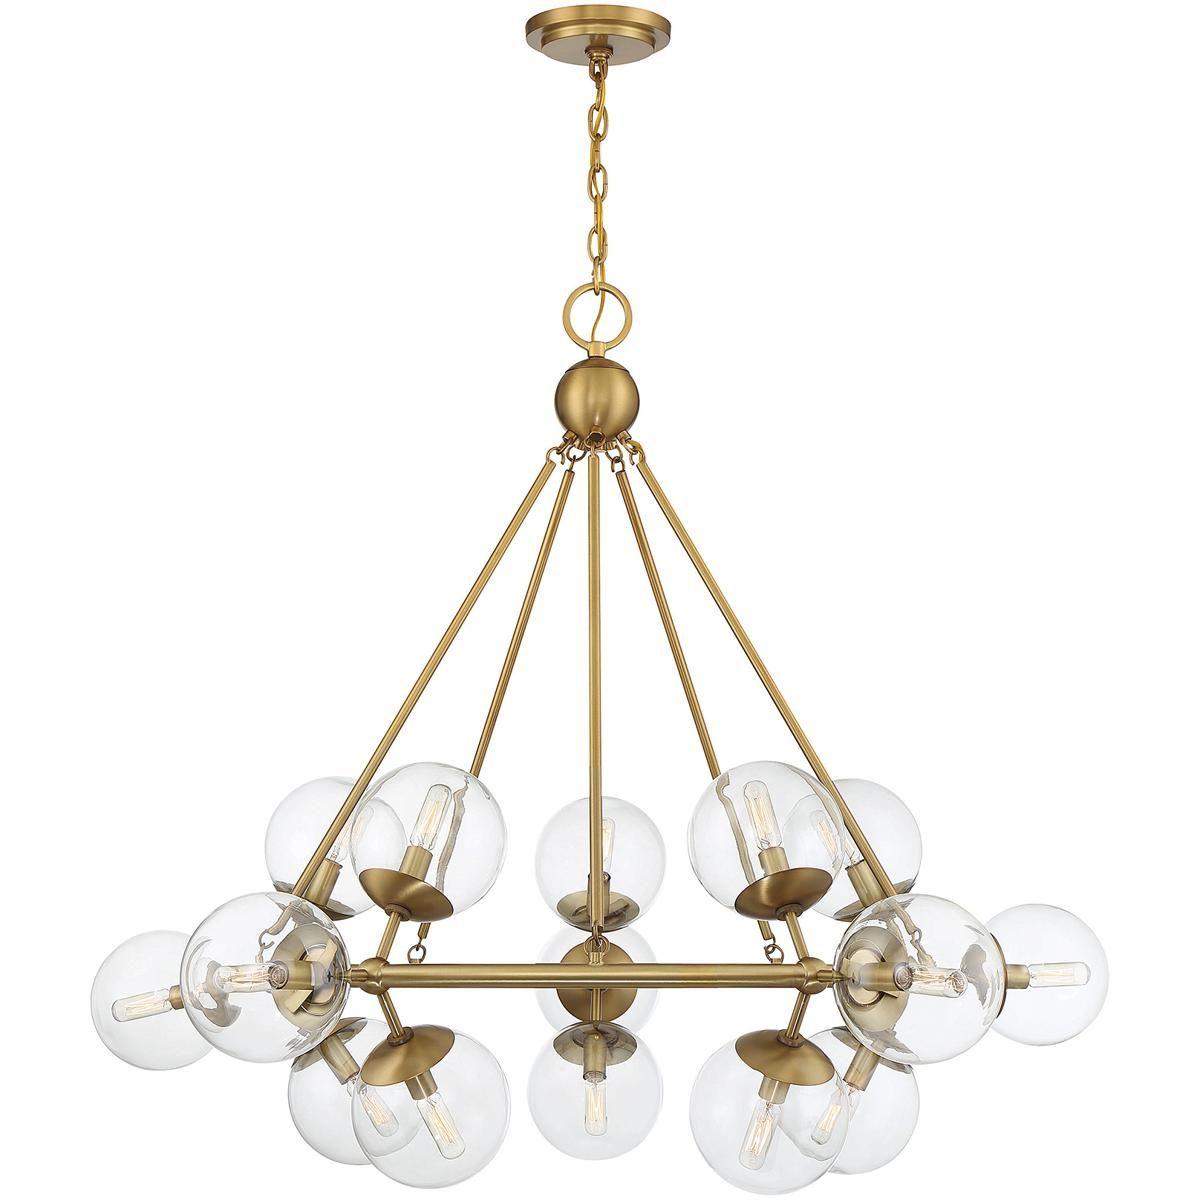 Beautiful Brass Lighting Options for Your Home